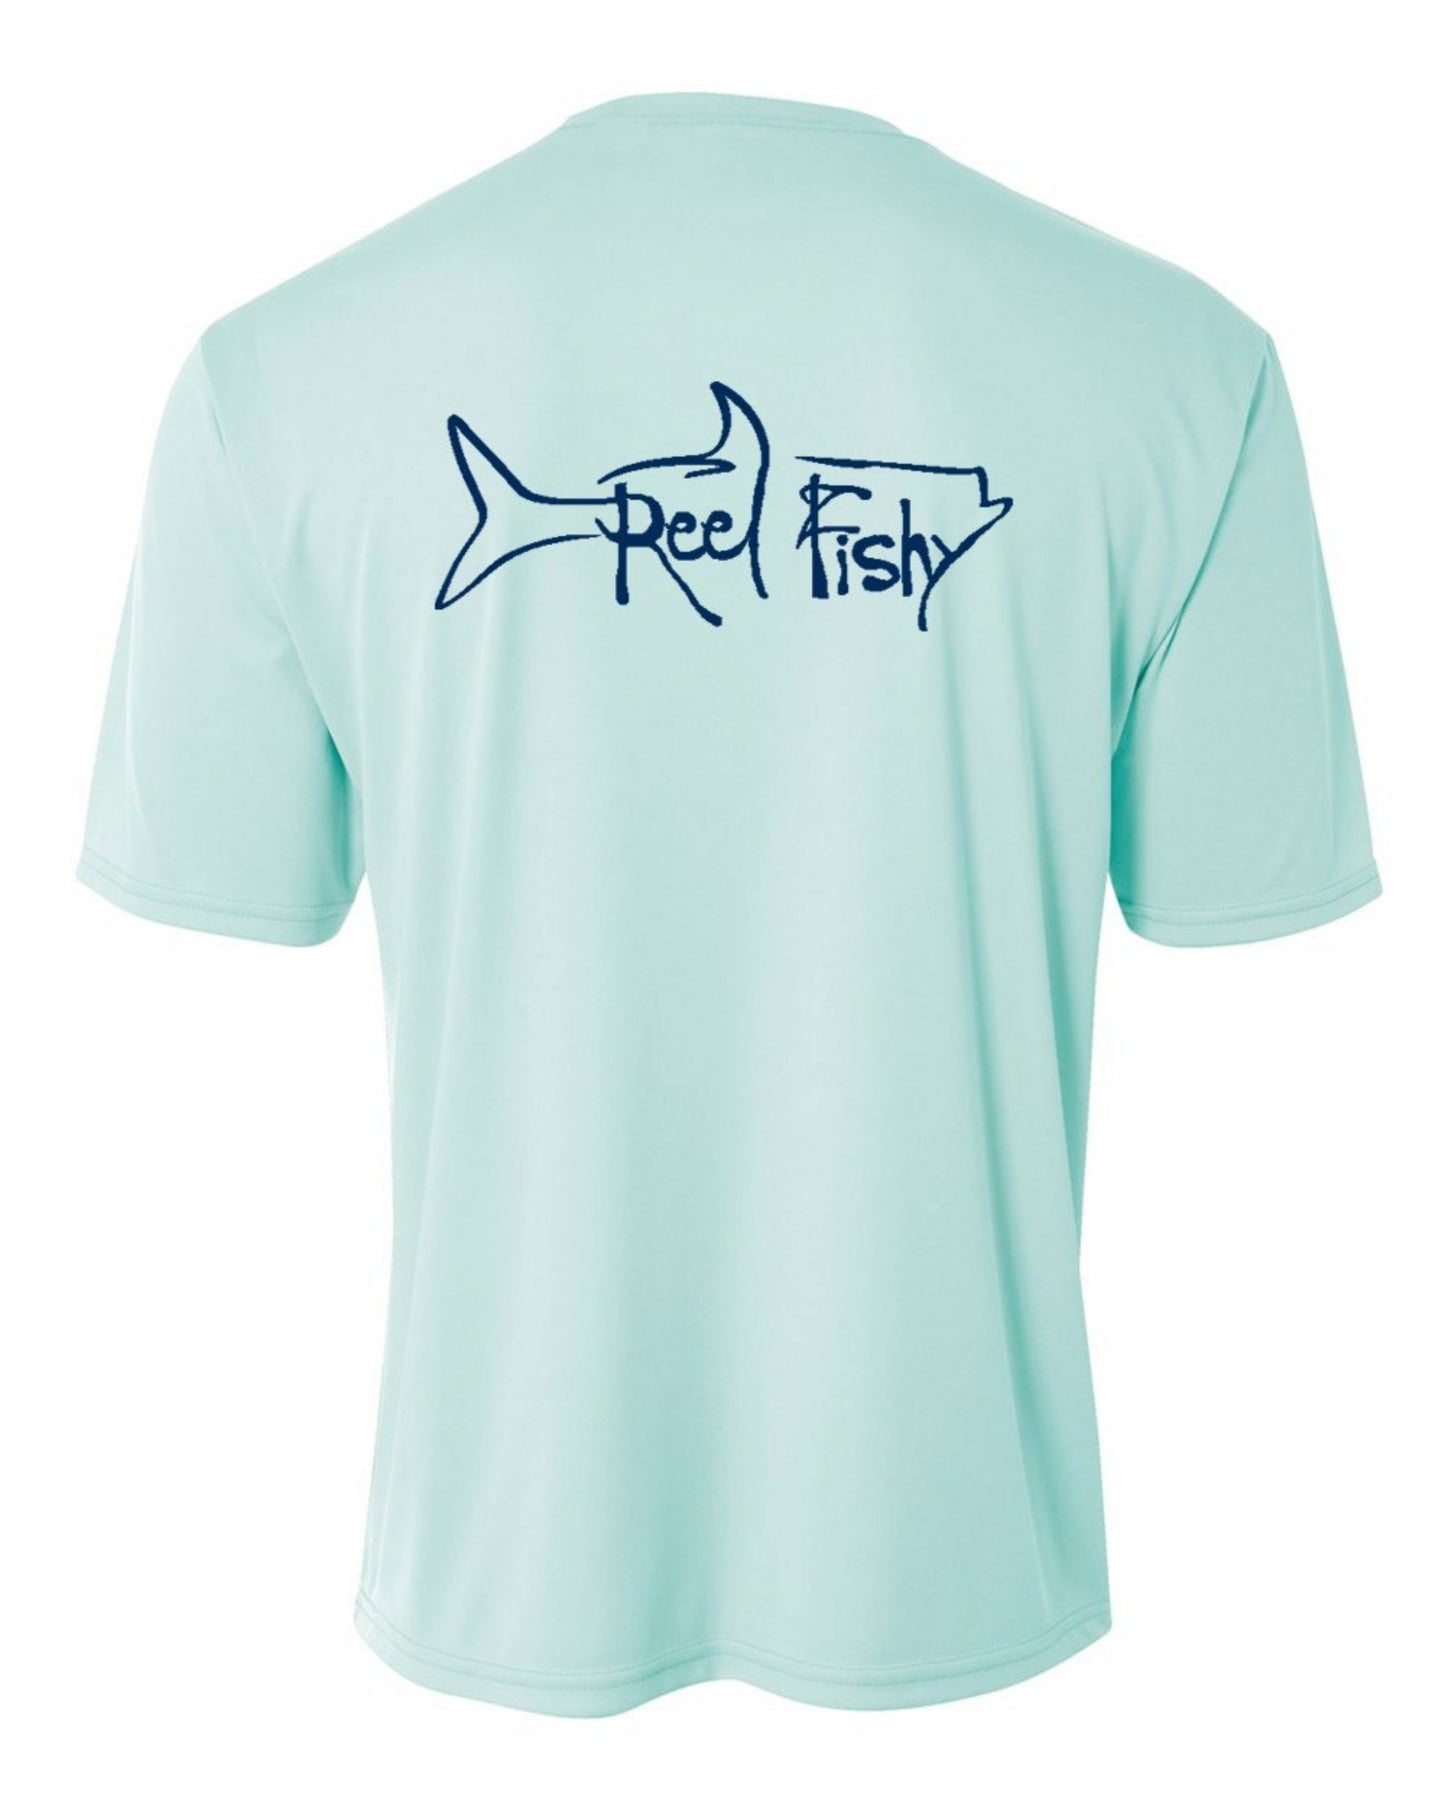 Youth Performance Dry-Fit Tarpon Fishing Shirts with Sun Protection by Reel Fishy Apparel - Short Sleeve Seagrass